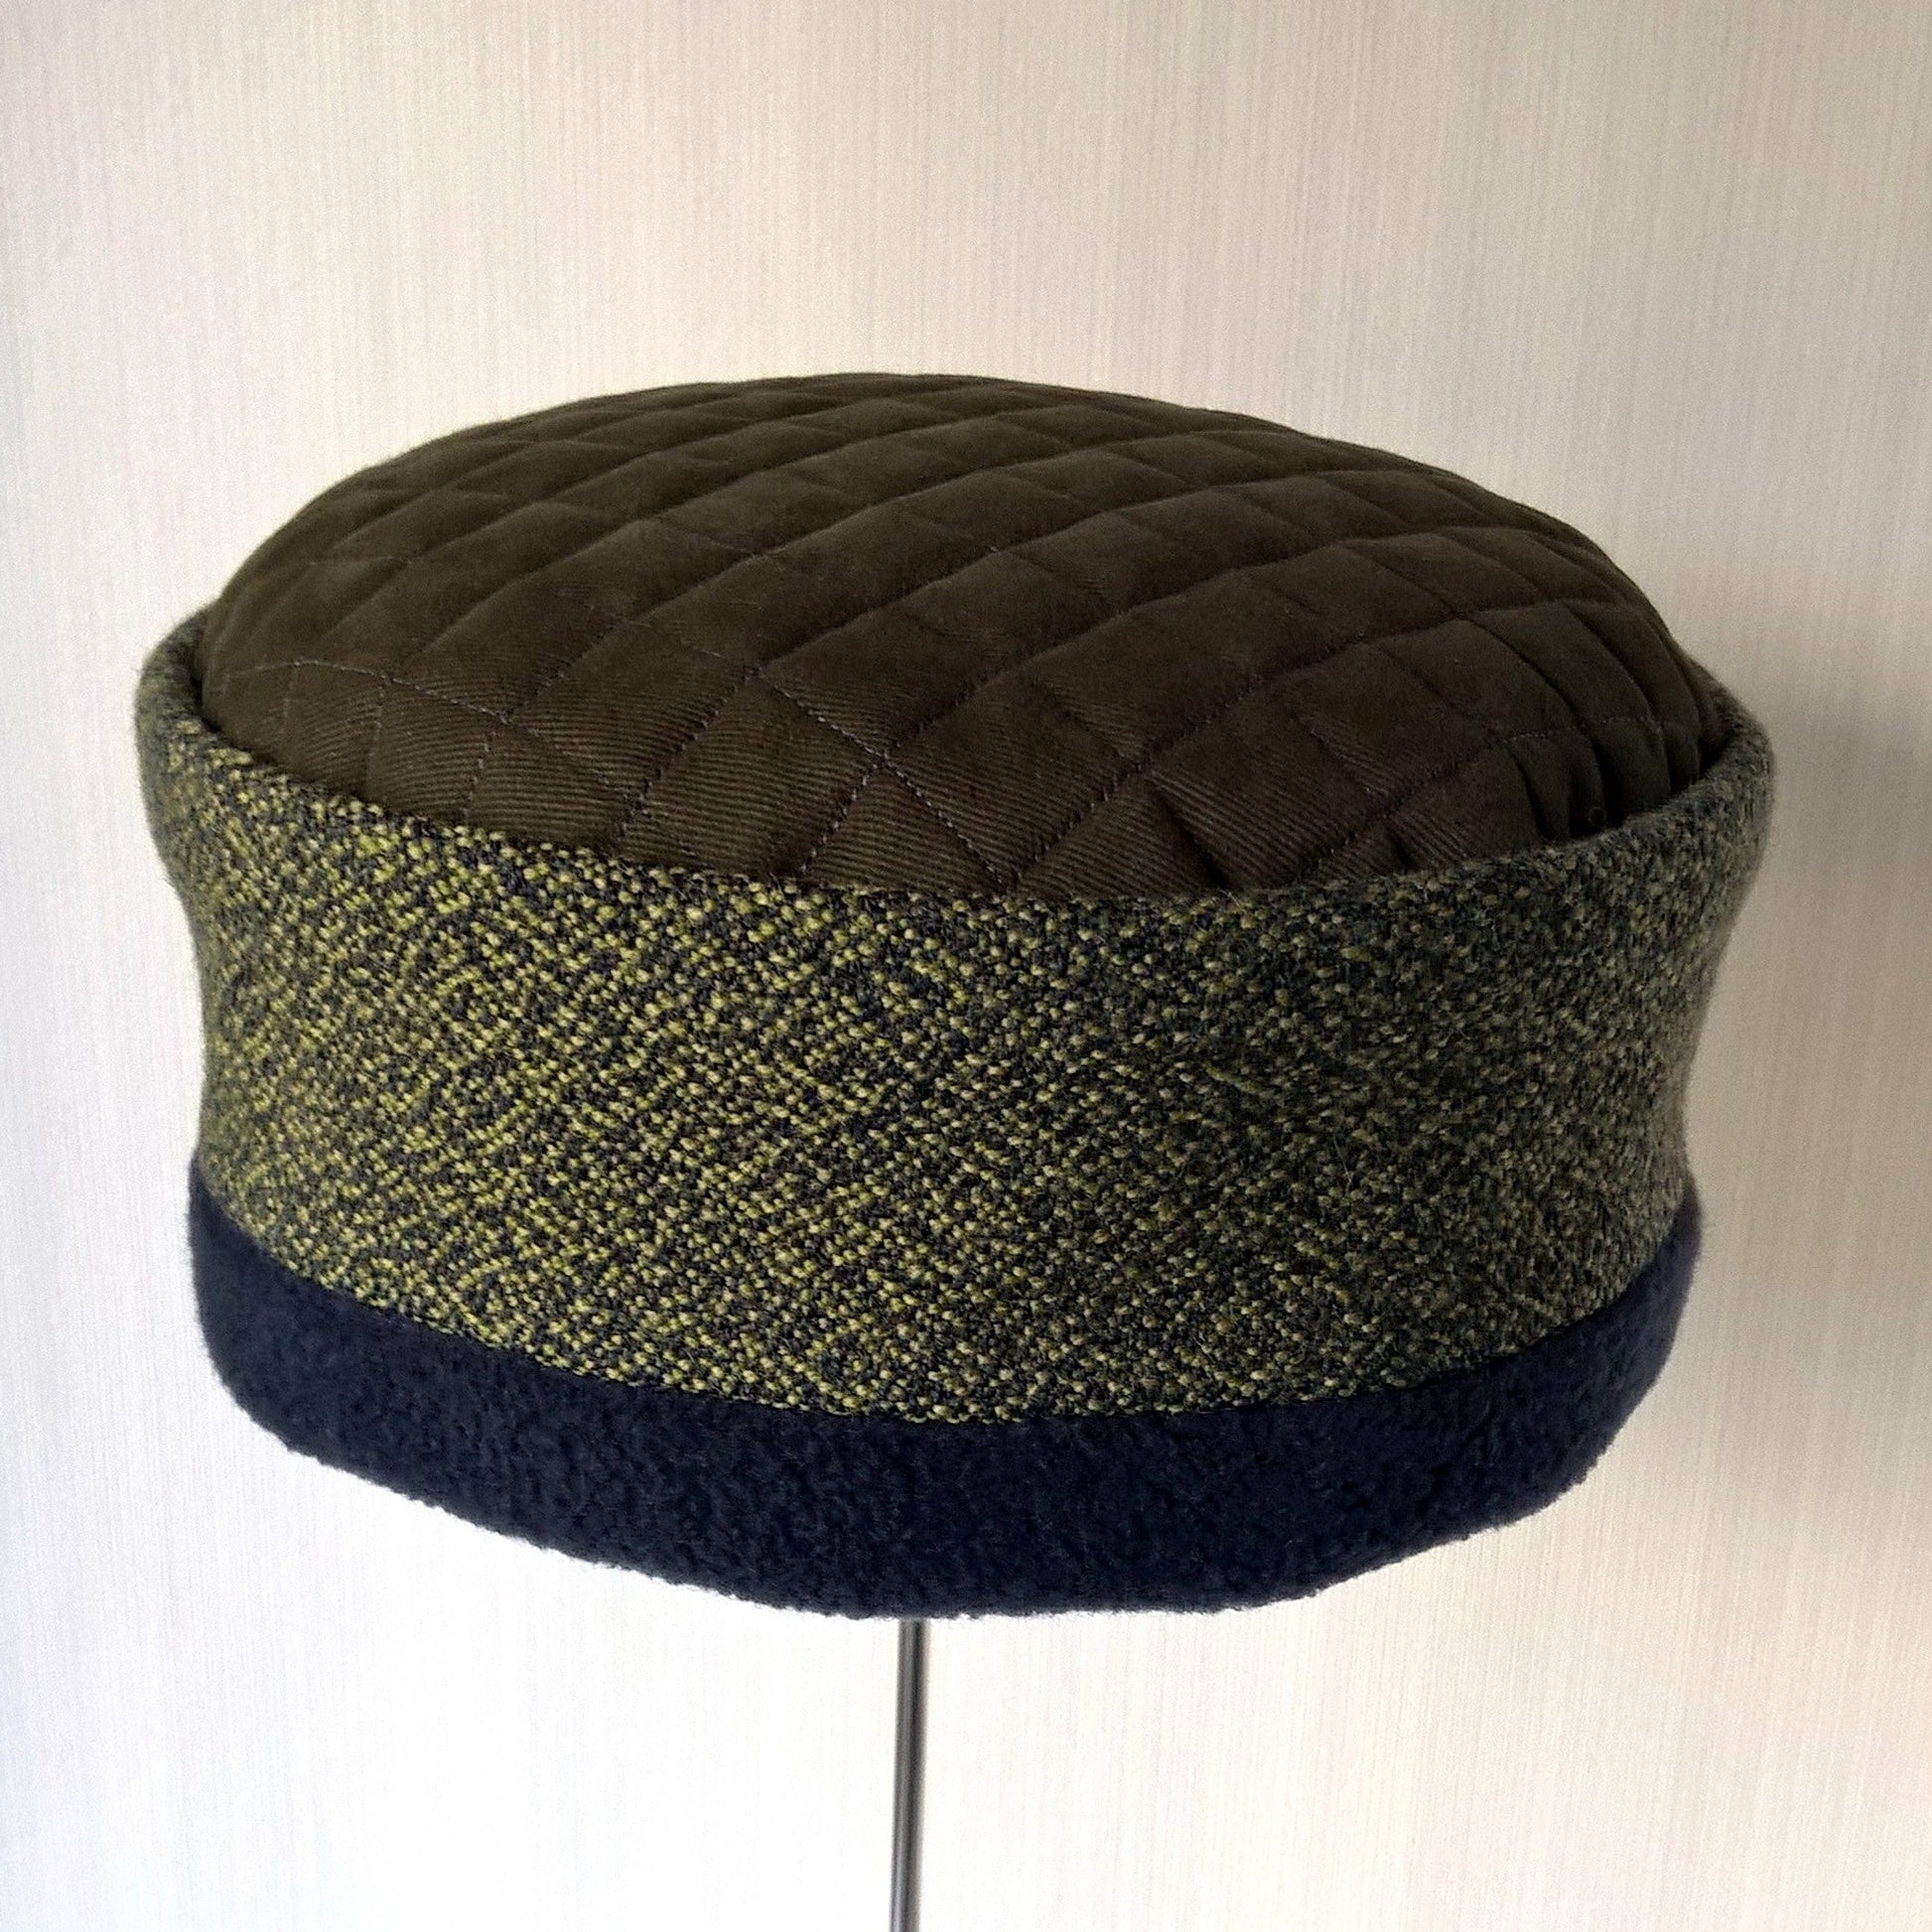 Khaki green speckled wool and navy fleece brimless hat